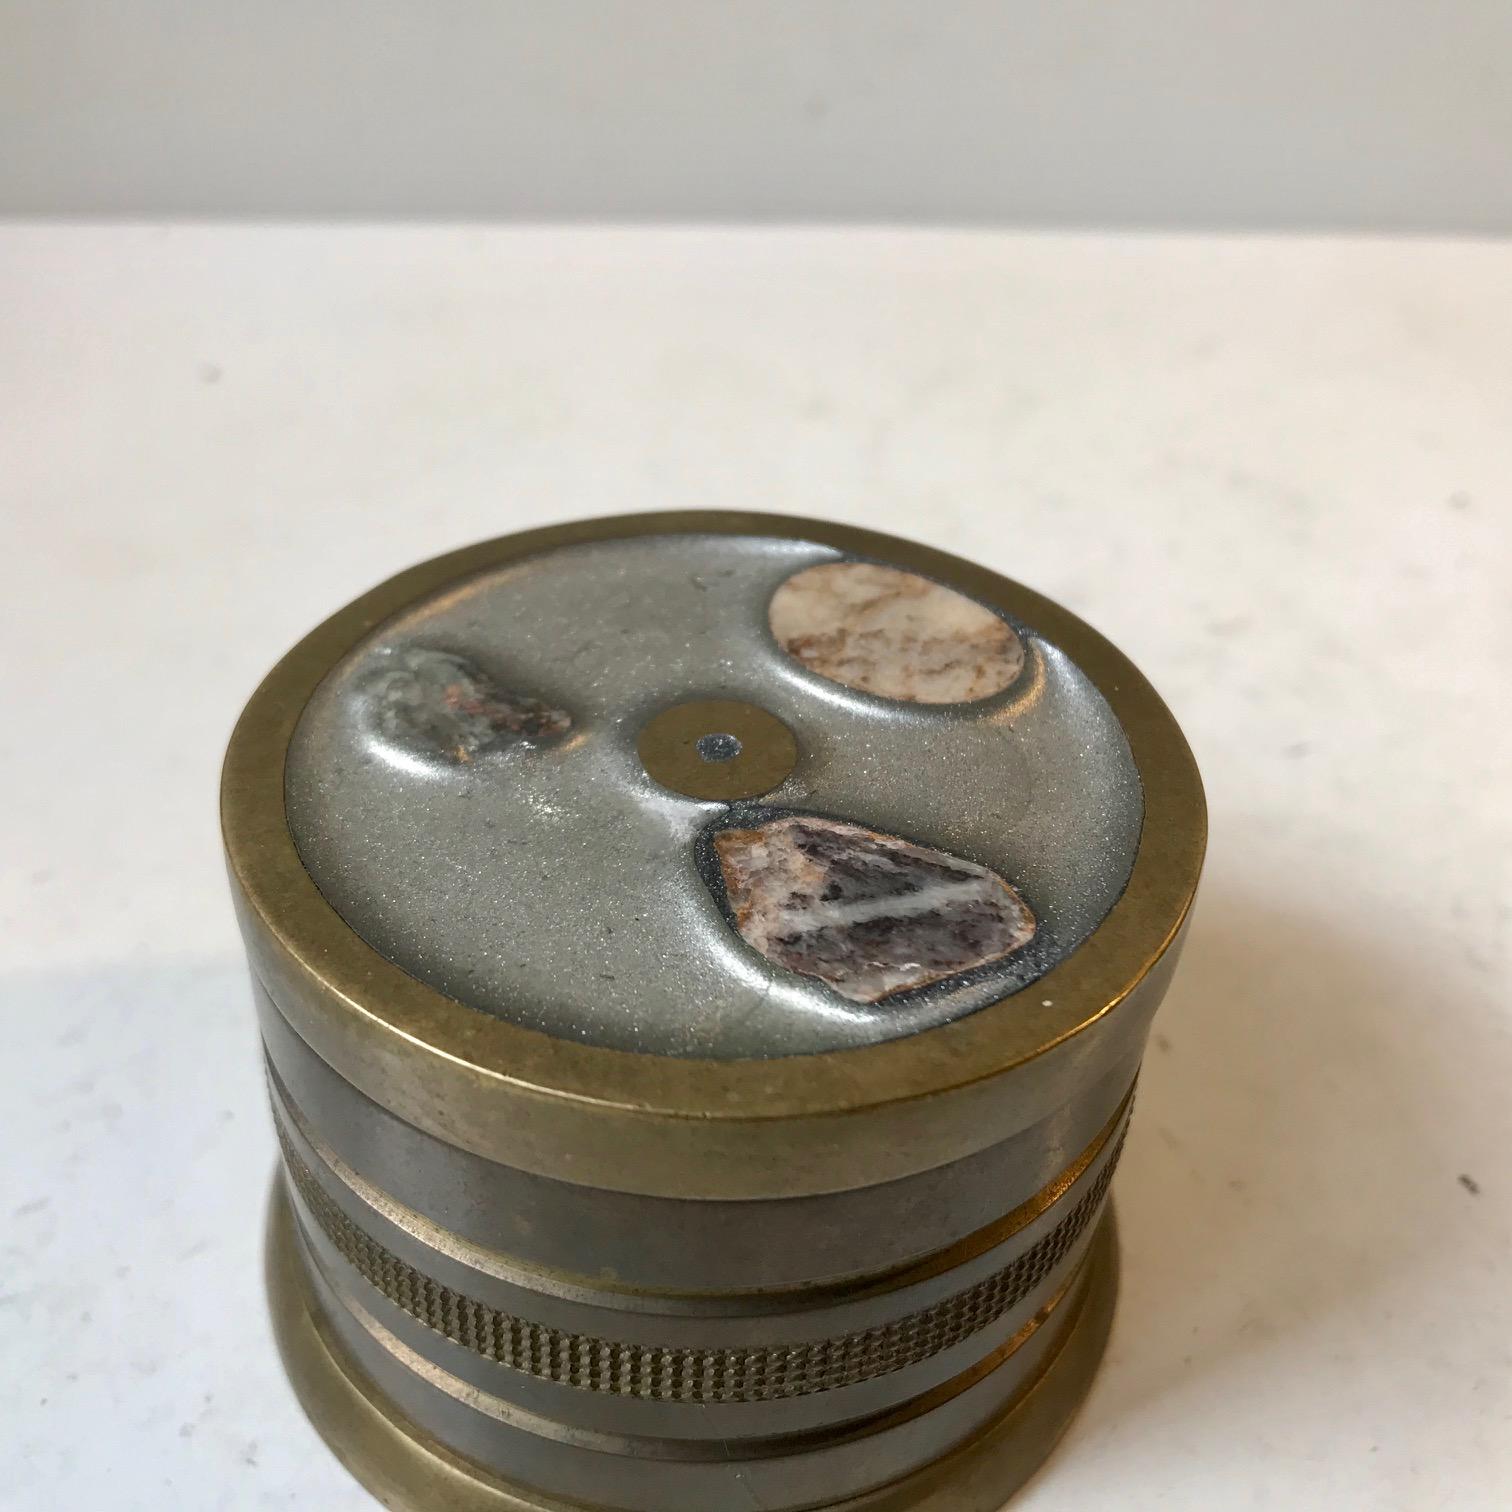 Cylindrical small trinket box fashioned from bronze. It features a removable lid covered with enamel and 3 samples of cut natural Scandinavian minerals. It was by an anonymous gold/silversmith during the 1960s. Its probably either Norwegian or